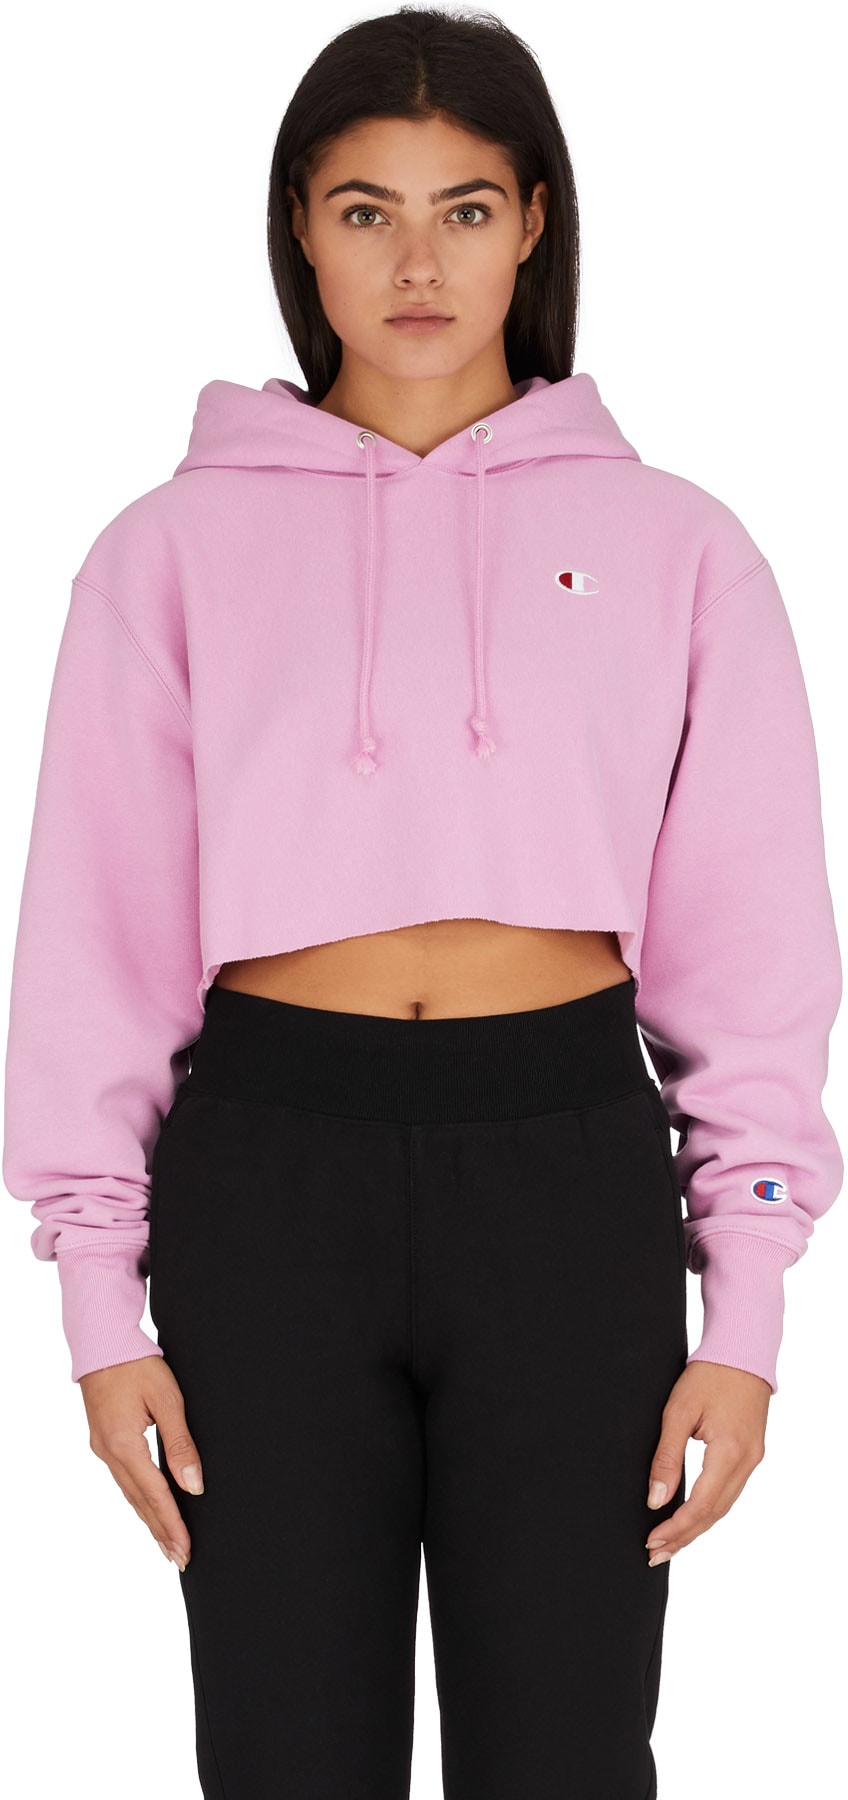 orchid champion hoodie